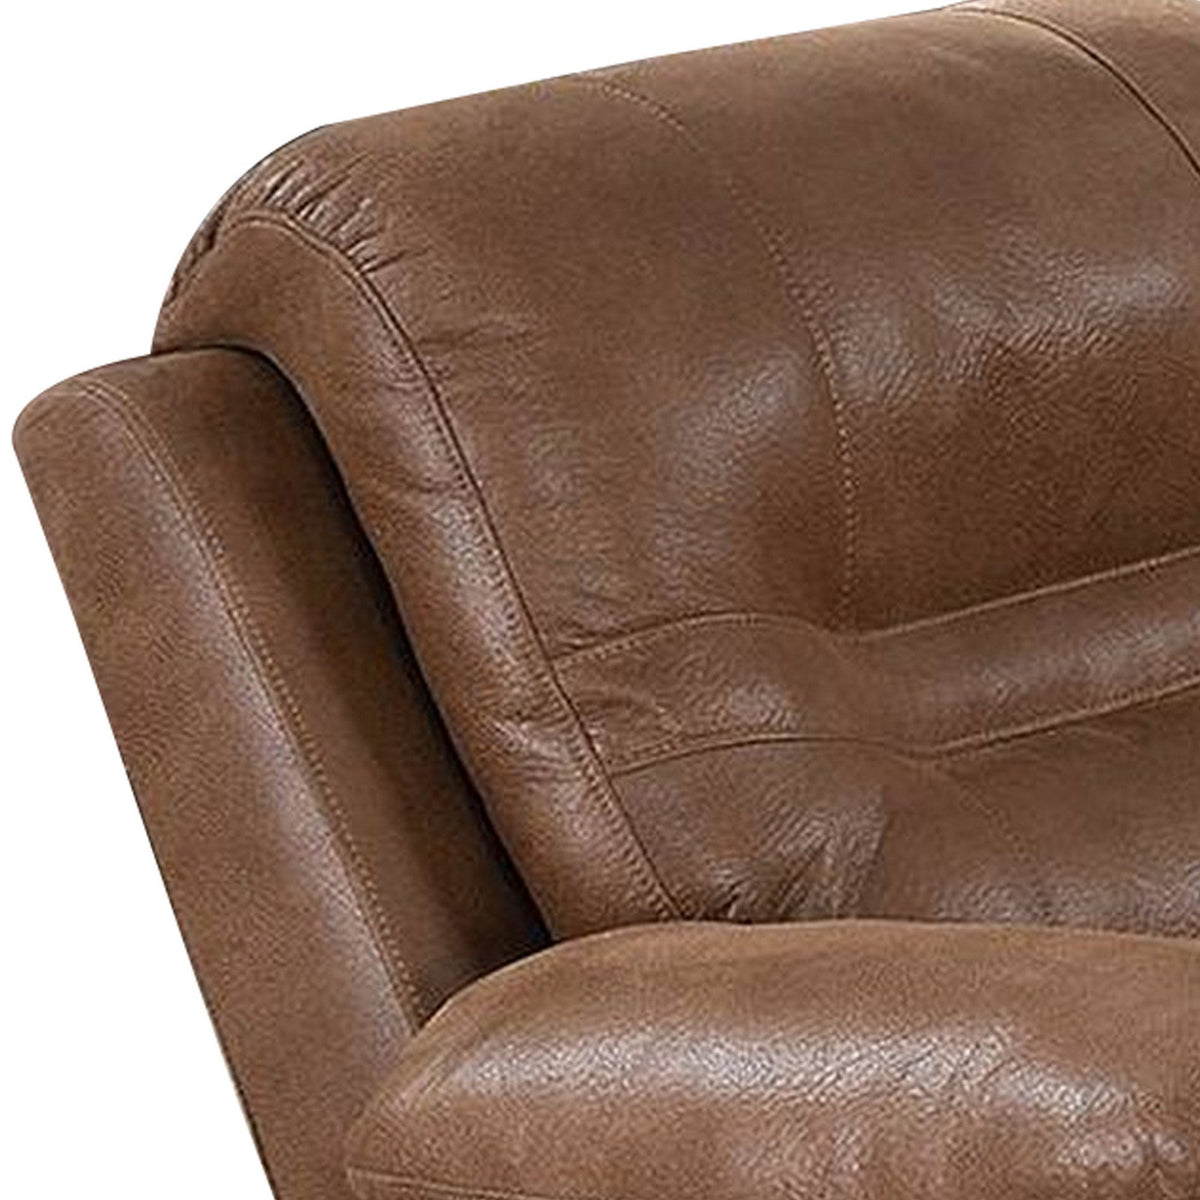 41 Inch leatherette Reclining Chair with USB Port, Brown - BM232082